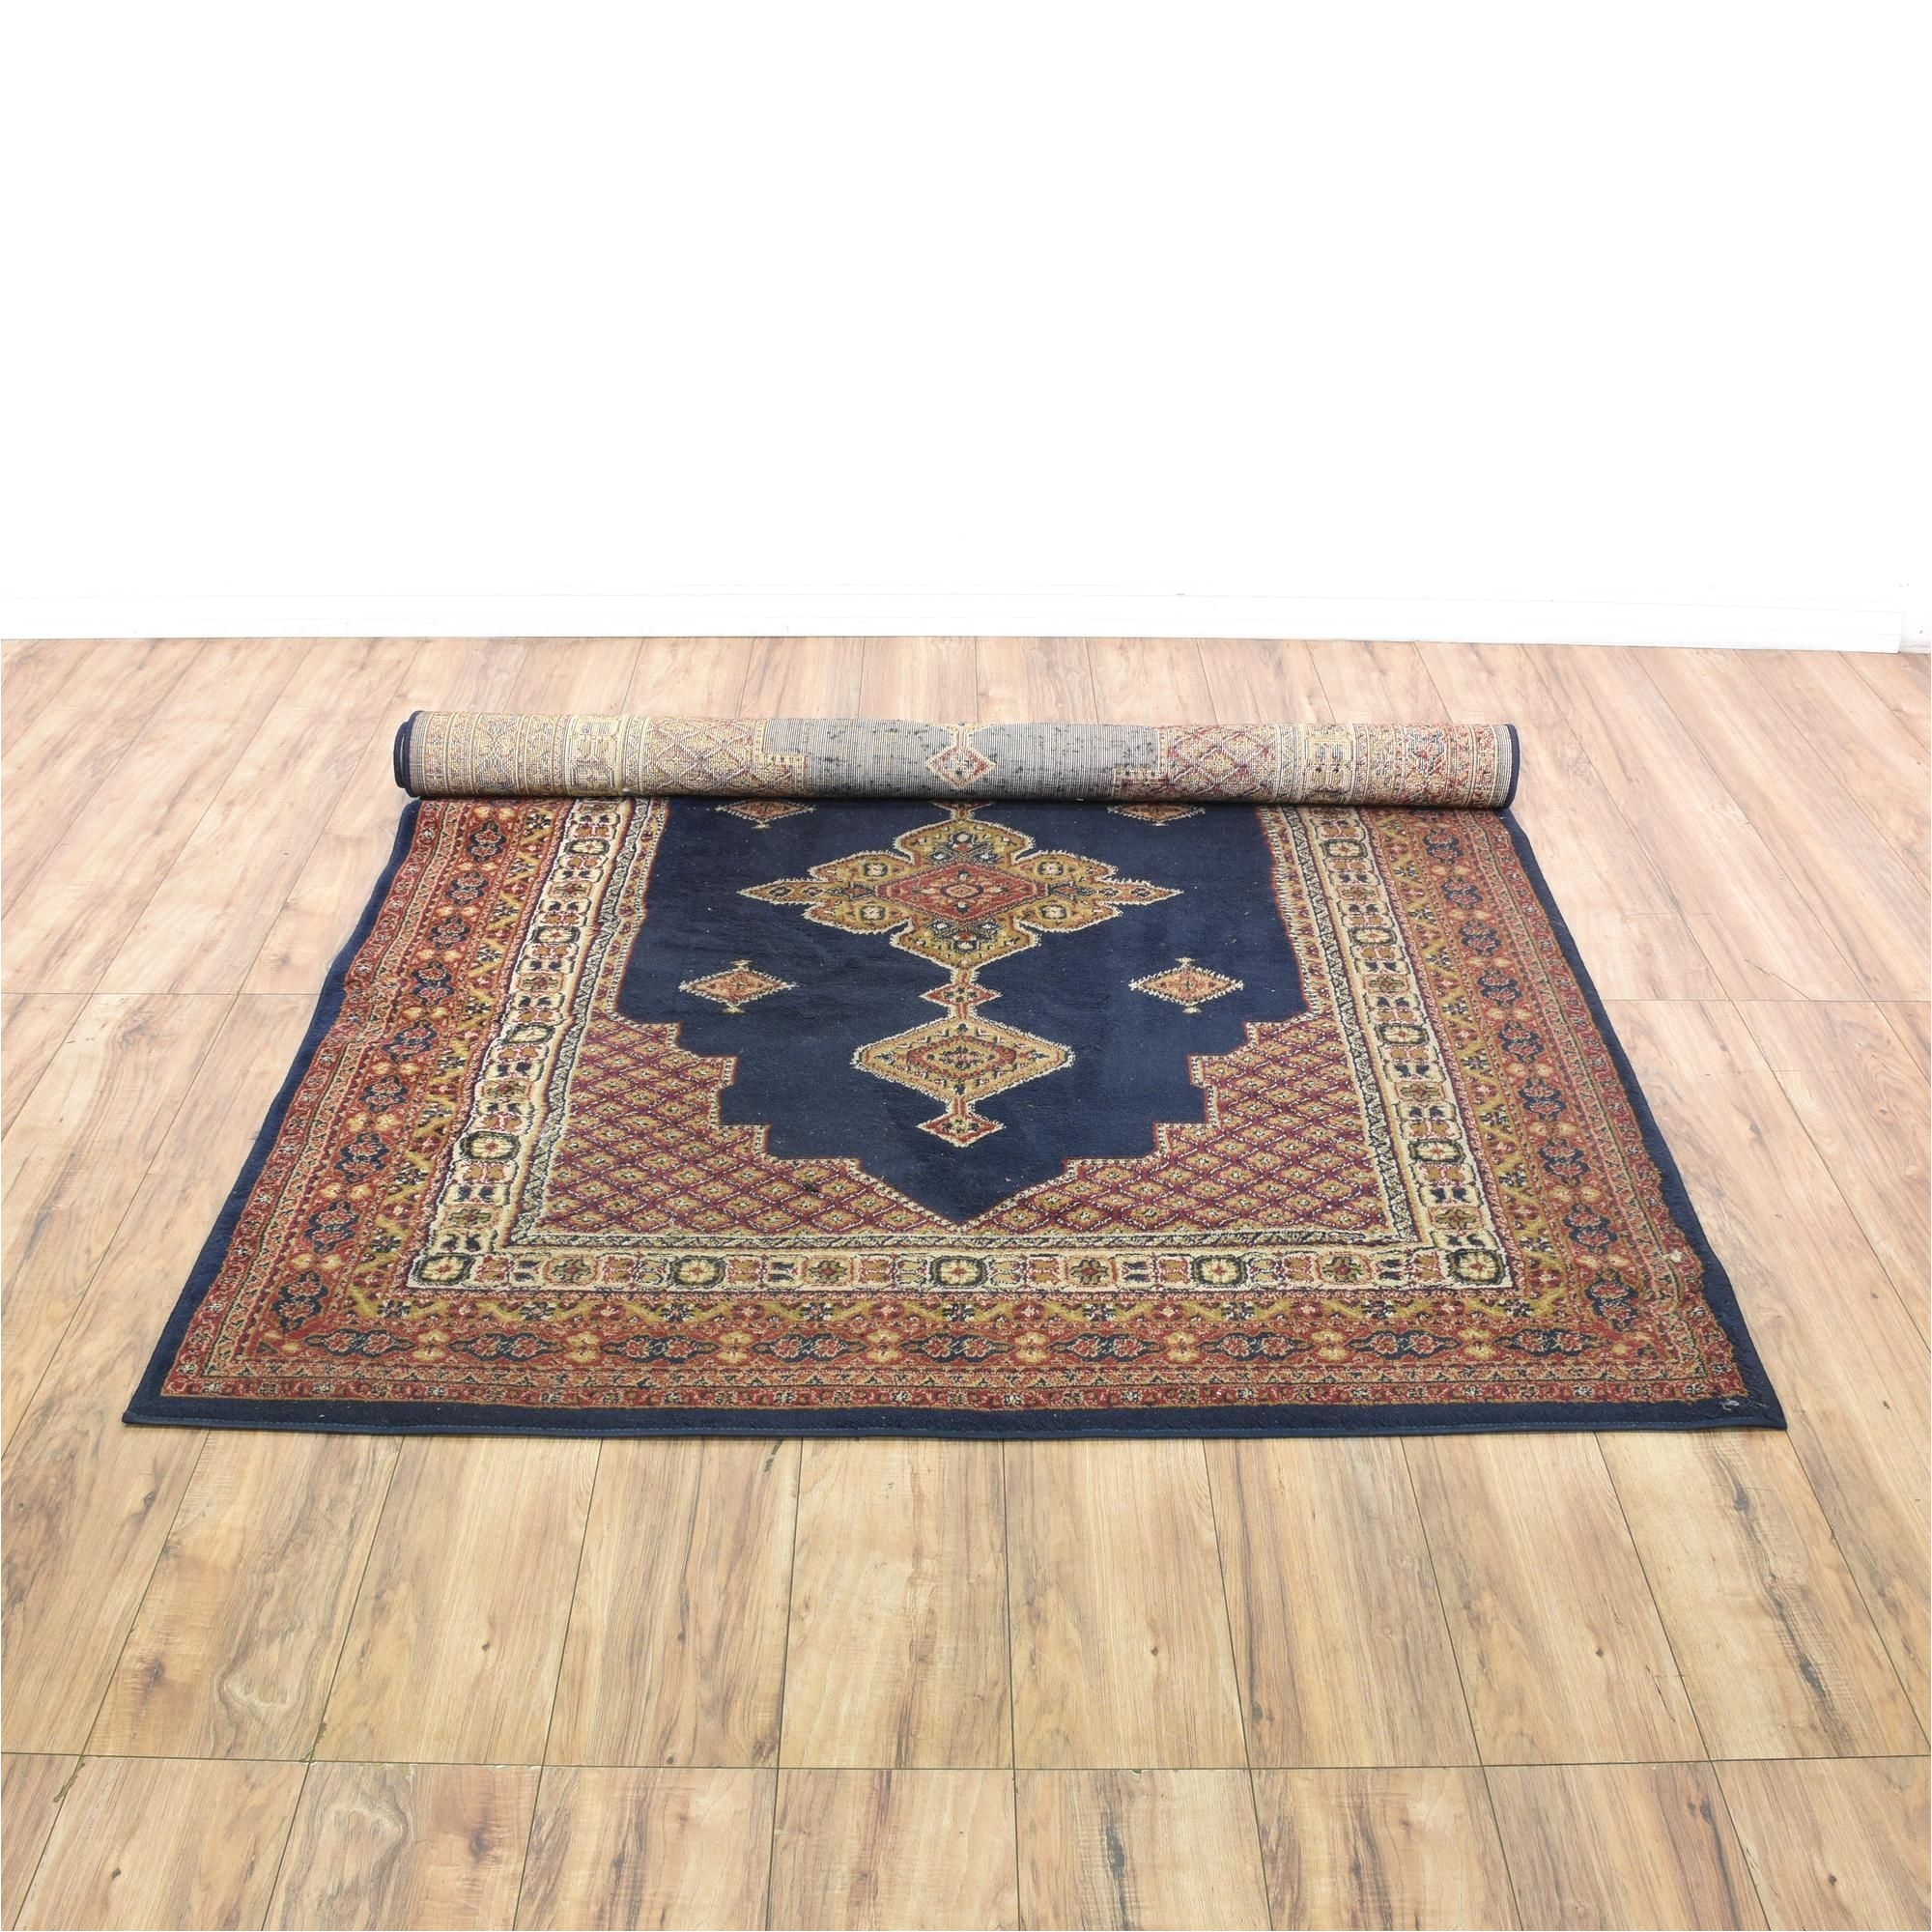 this bohemian rug is woven in a durable dark navy blue red and yellow gold finish this large area rug has striped border trim floral accents and center